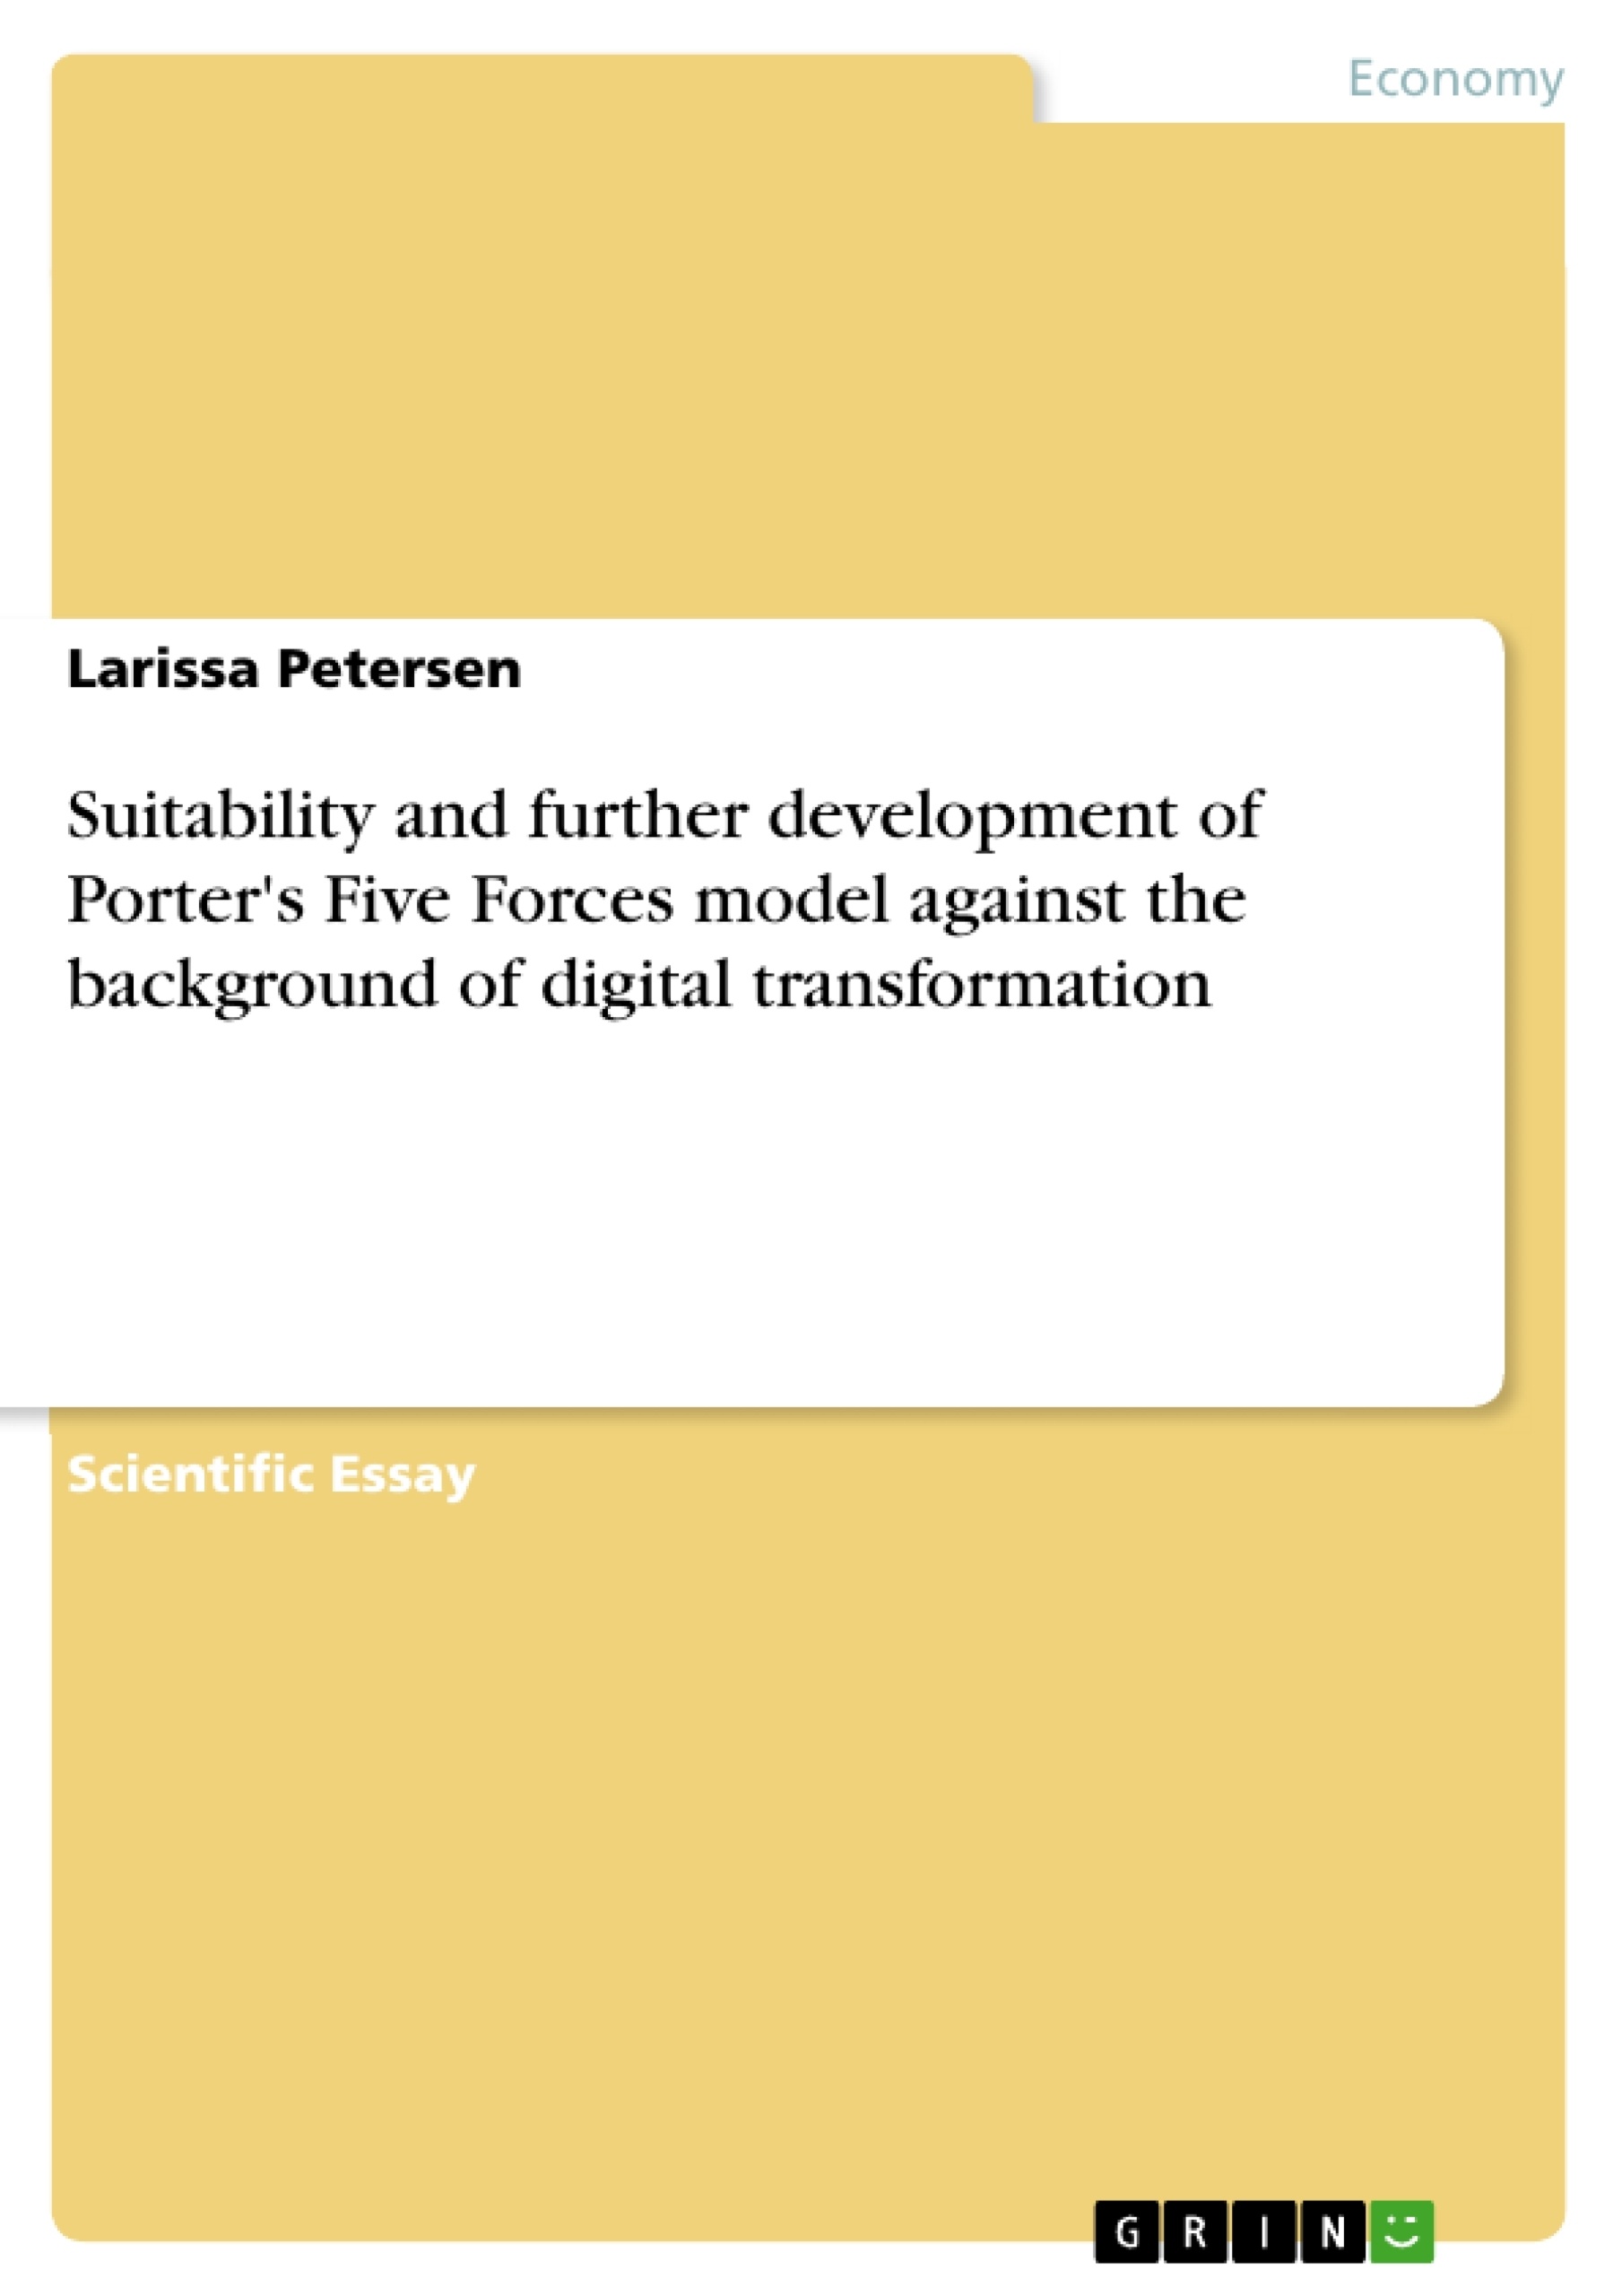 Title: Suitability and further development of Porter's Five Forces model against the background of digital transformation